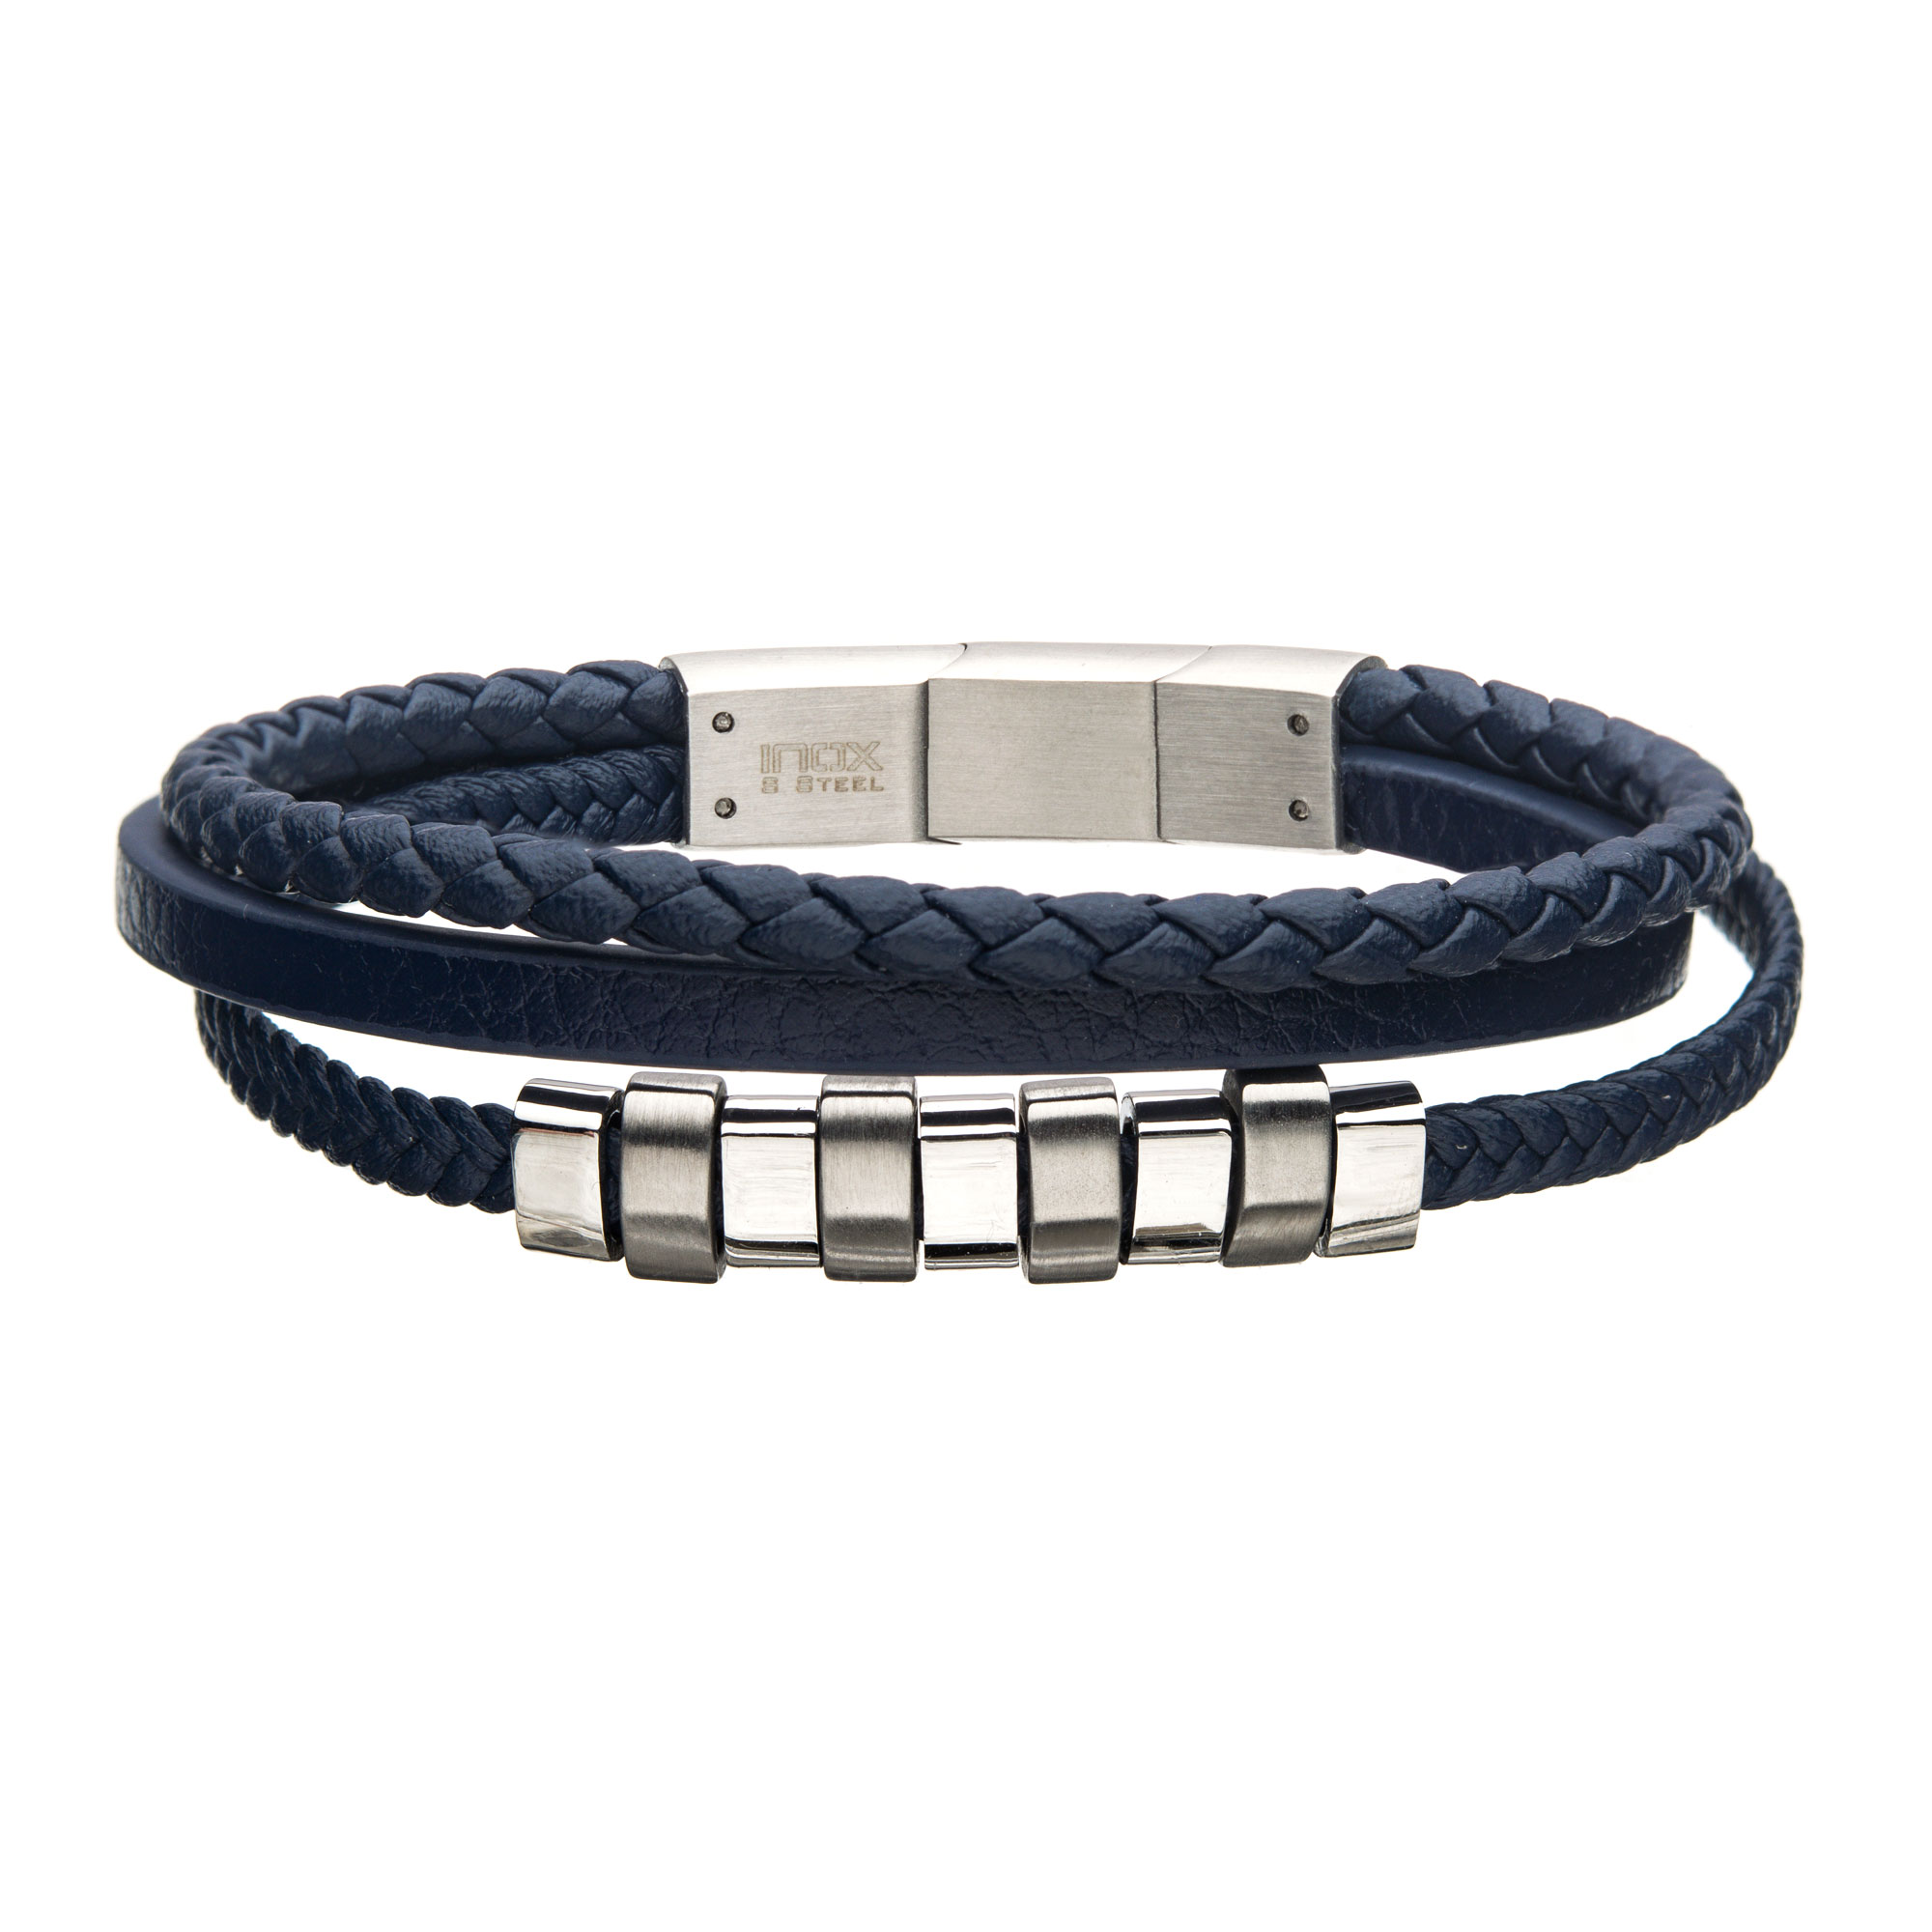 Blue Braided Multi Leather with Steel Beads Bracelet Enchanted Jewelry Plainfield, CT